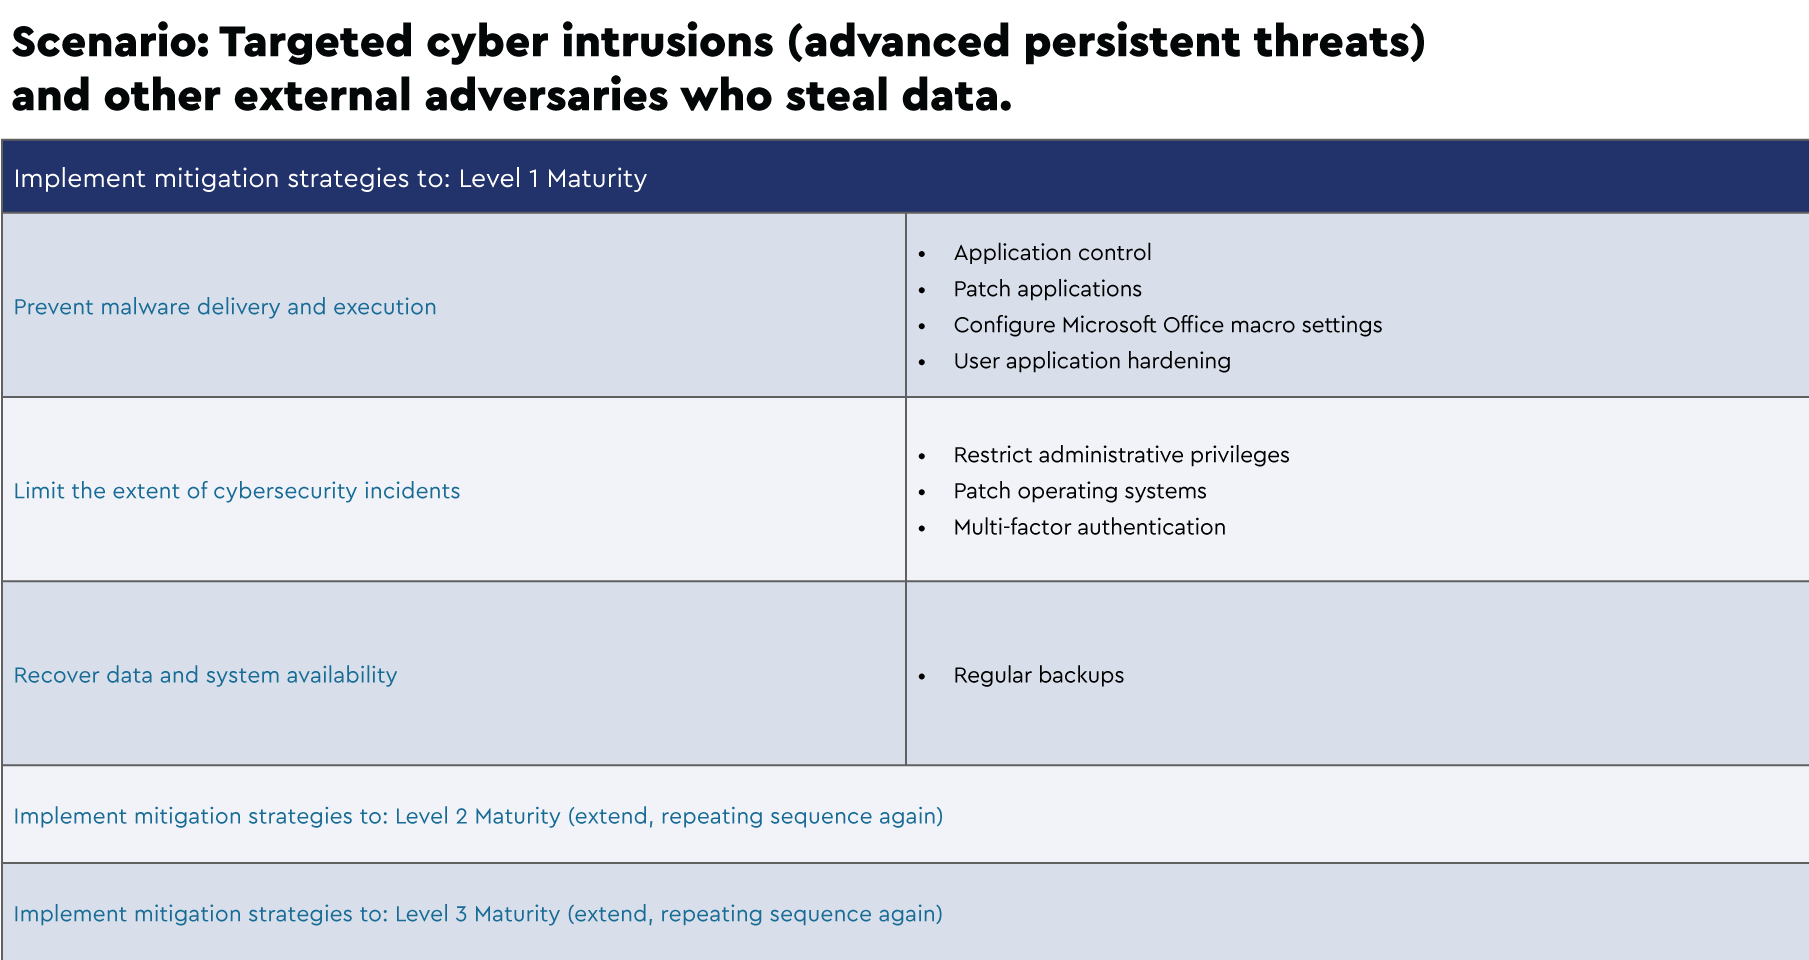 Scenario: Targeted cyber intrusions (advanced persistent threats) and other external adversaries who steal data